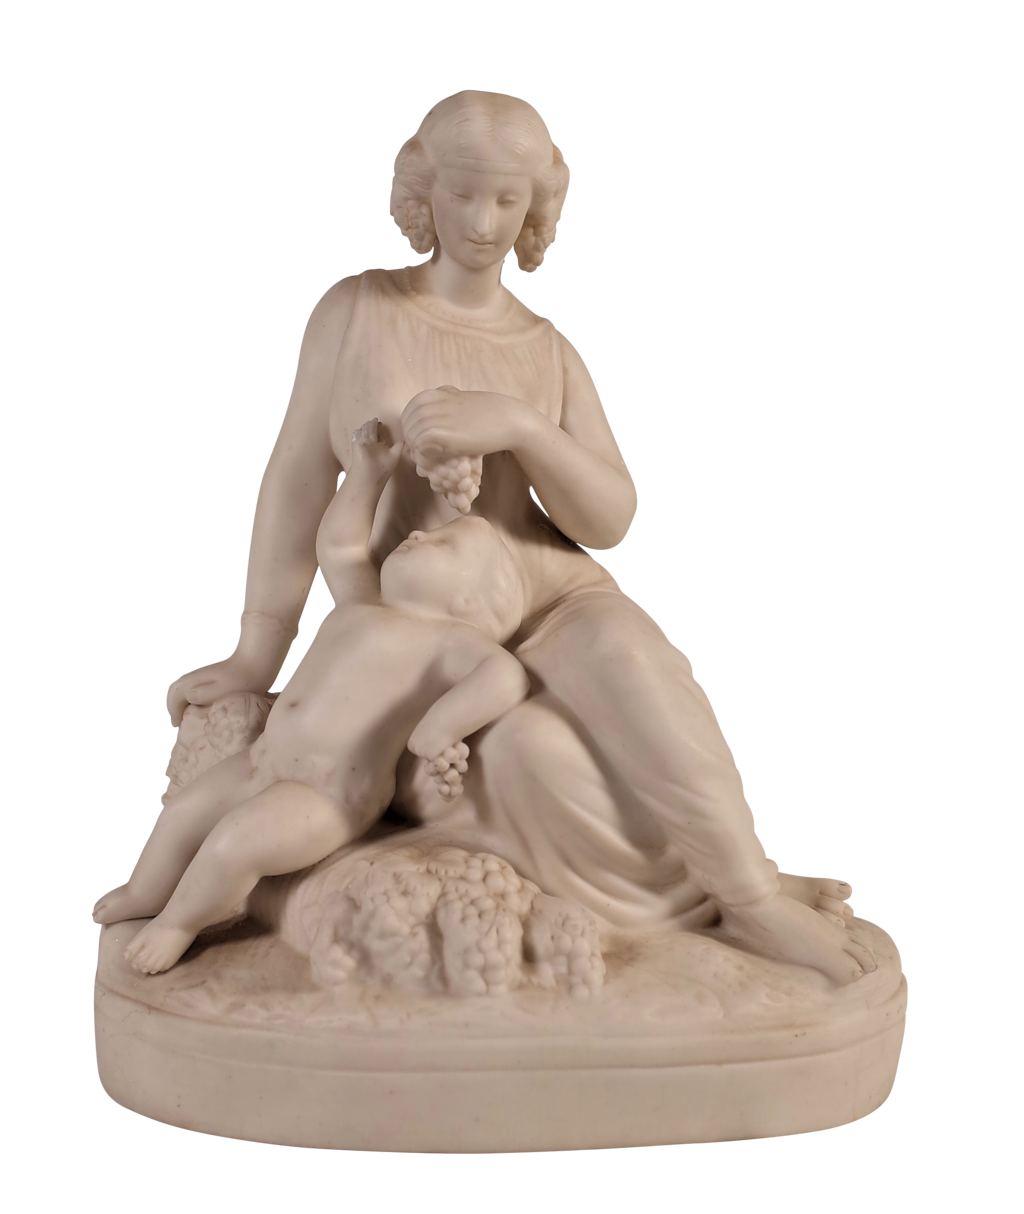 Parian Ware figure of a Seated Woman Feeding Grapes to a Child